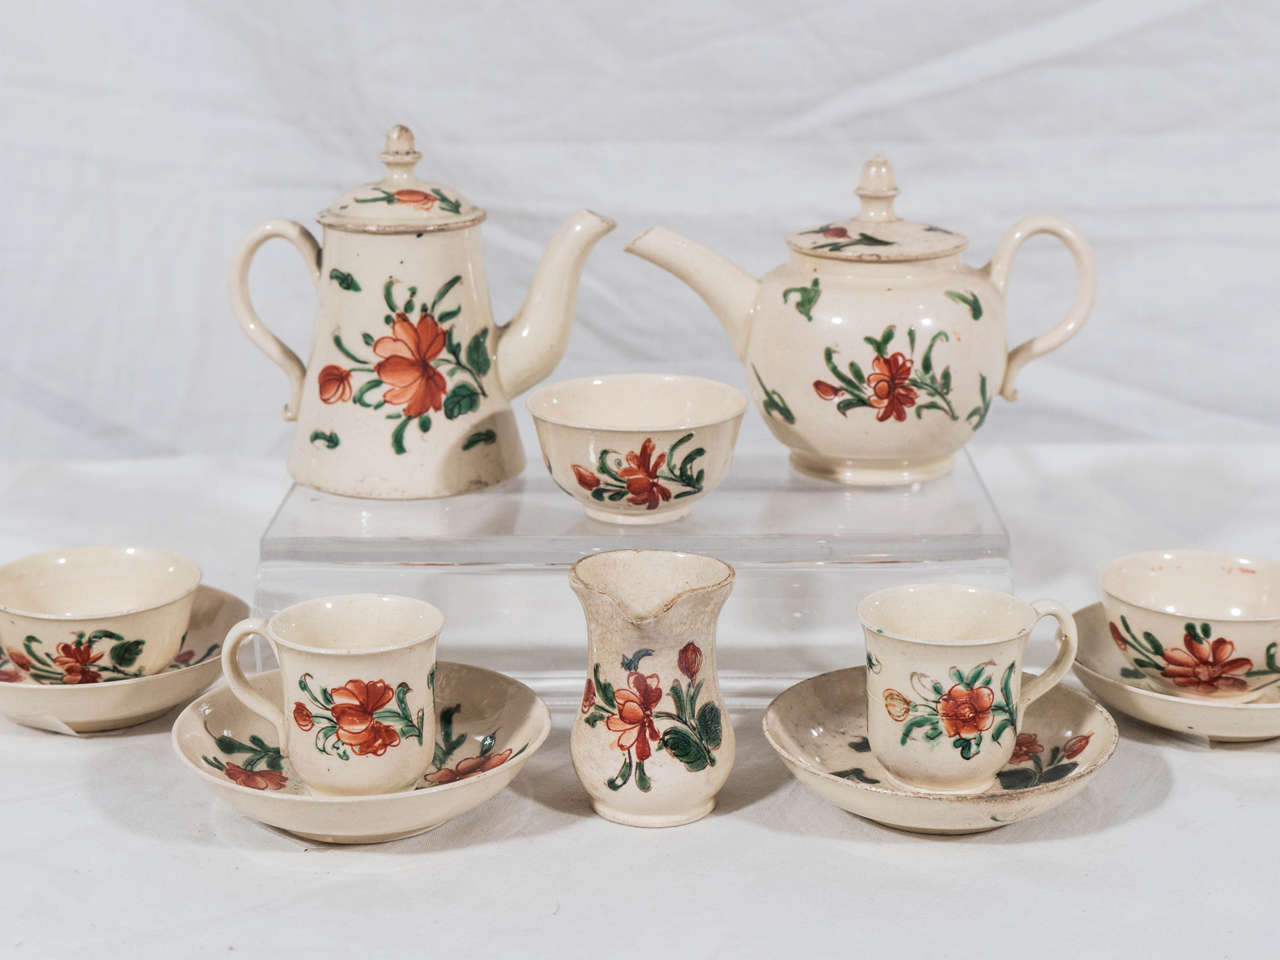 An exceptionally fine 18th century creamware miniature nursery tea-set with a traditional floral design painted in iron red and green. Made in Staffordshire and dating to circa 1770 it is a rare survivor considering it was made for children's play.